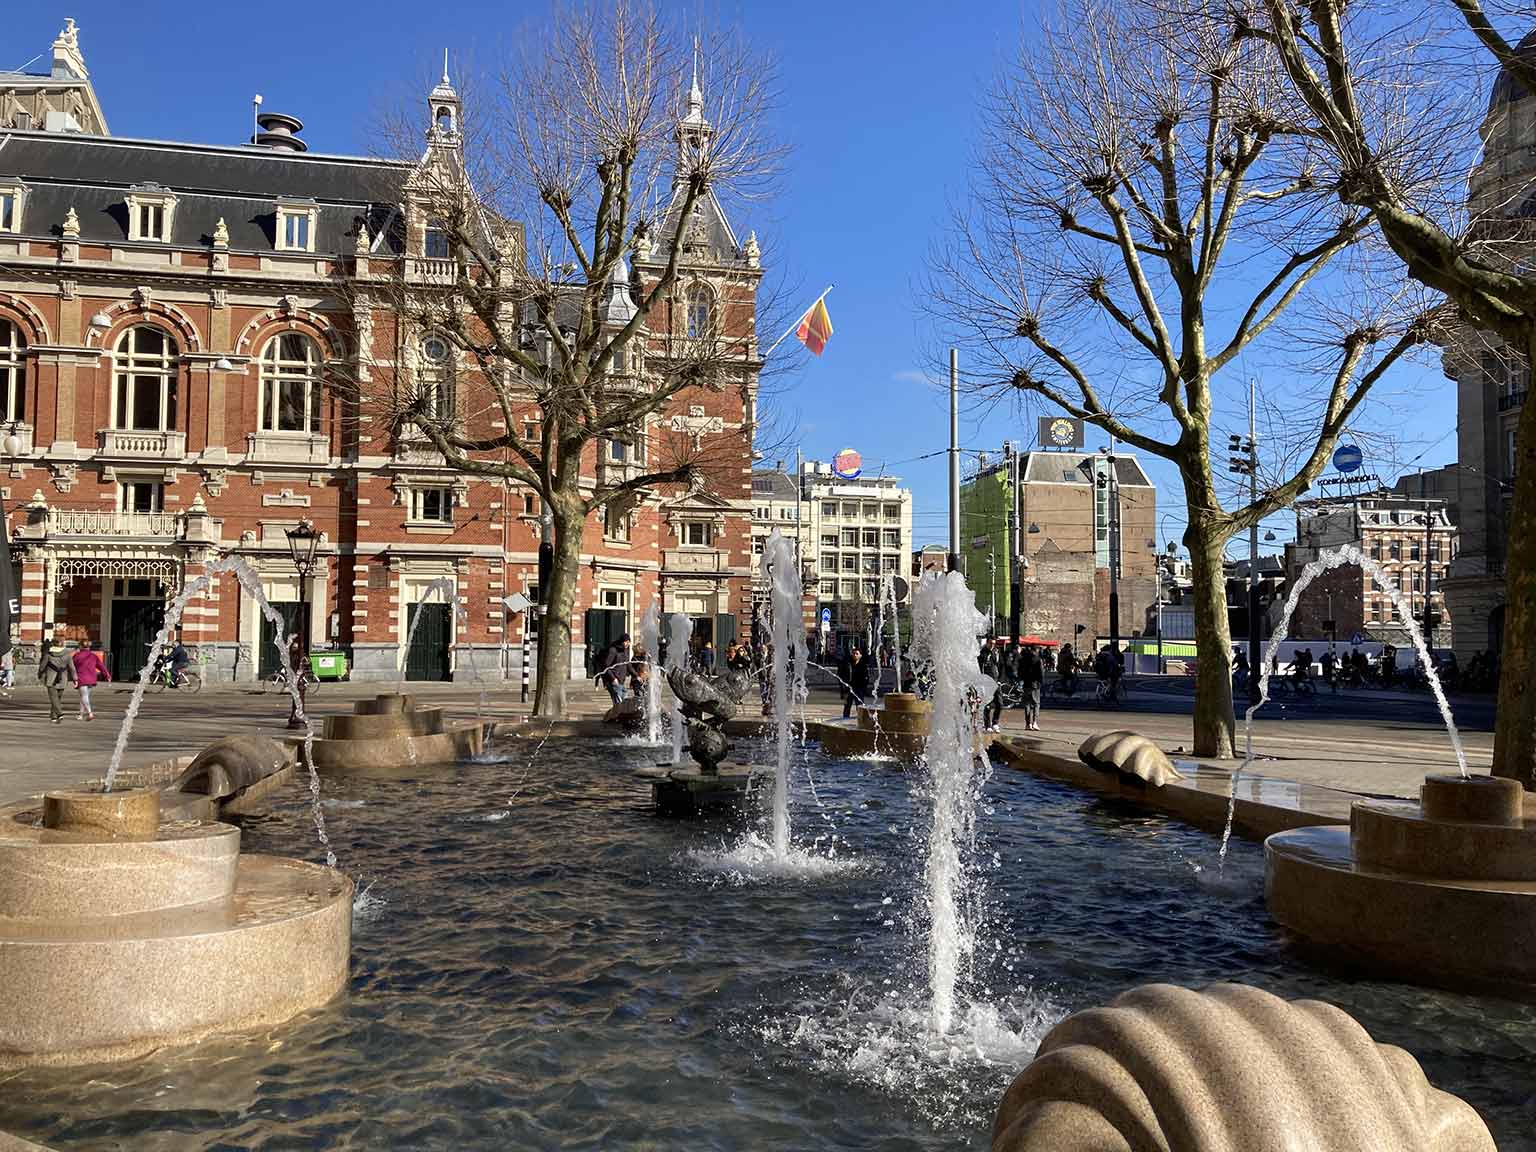 Stadsschouwburg, Amsterdam, seen across the fountain in front of the American Hotel